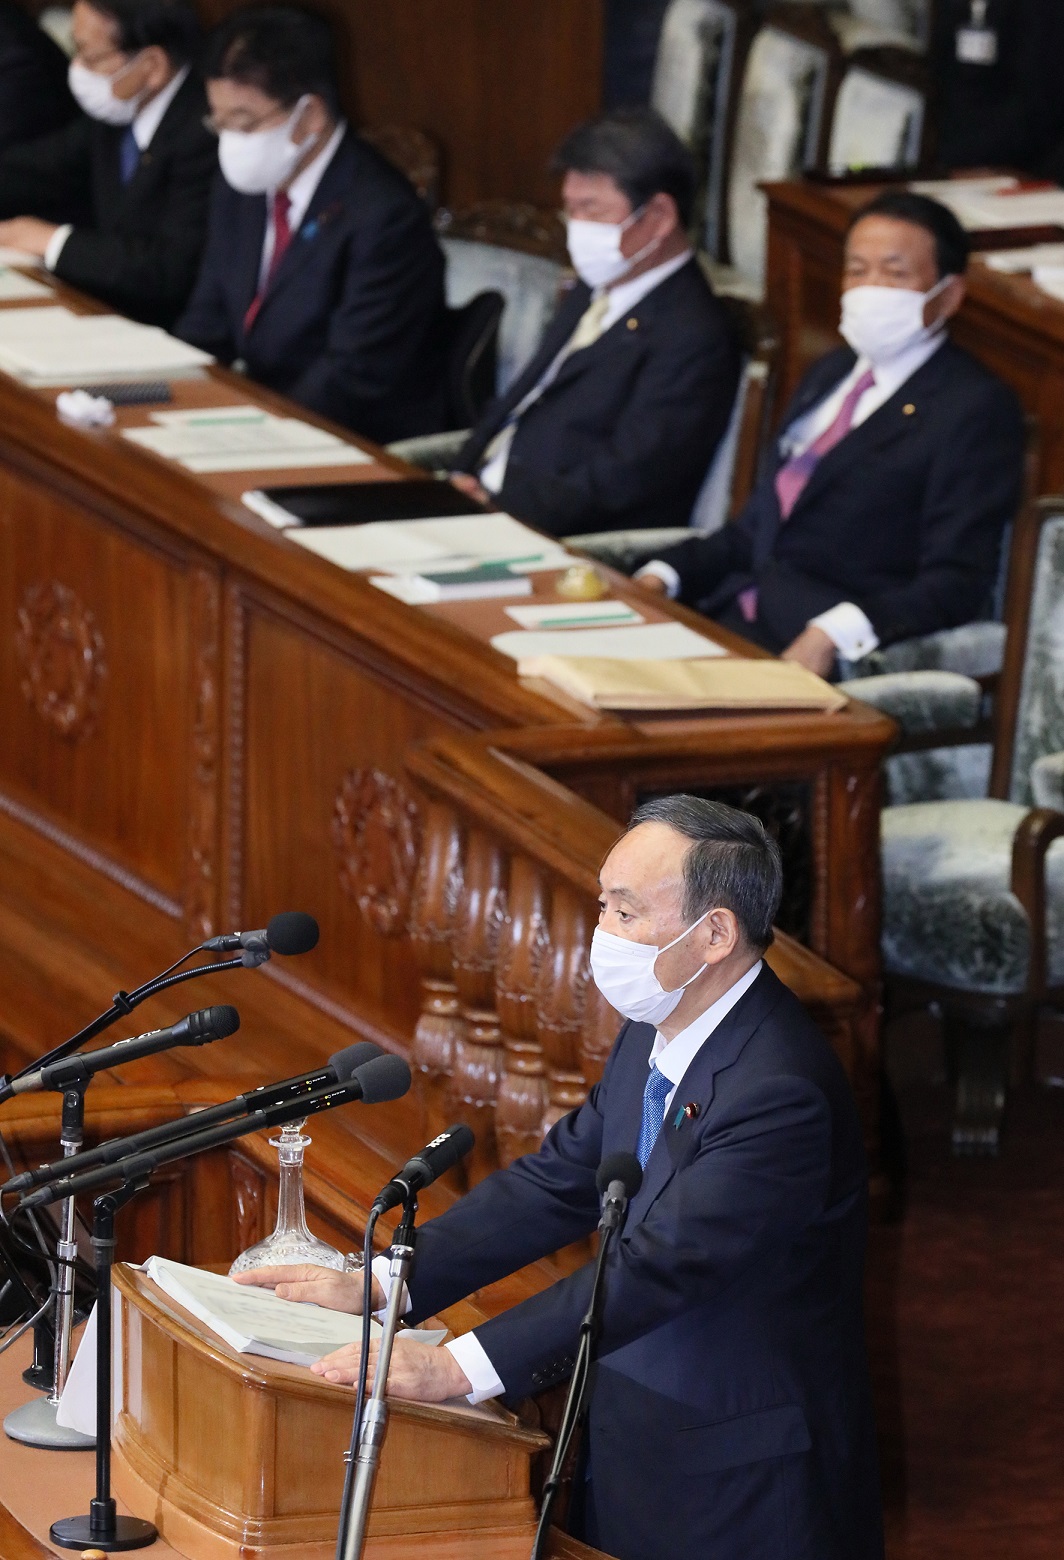 Photograph of the Prime Minister delivering a policy speech during the plenary session of the House of Representatives (12)